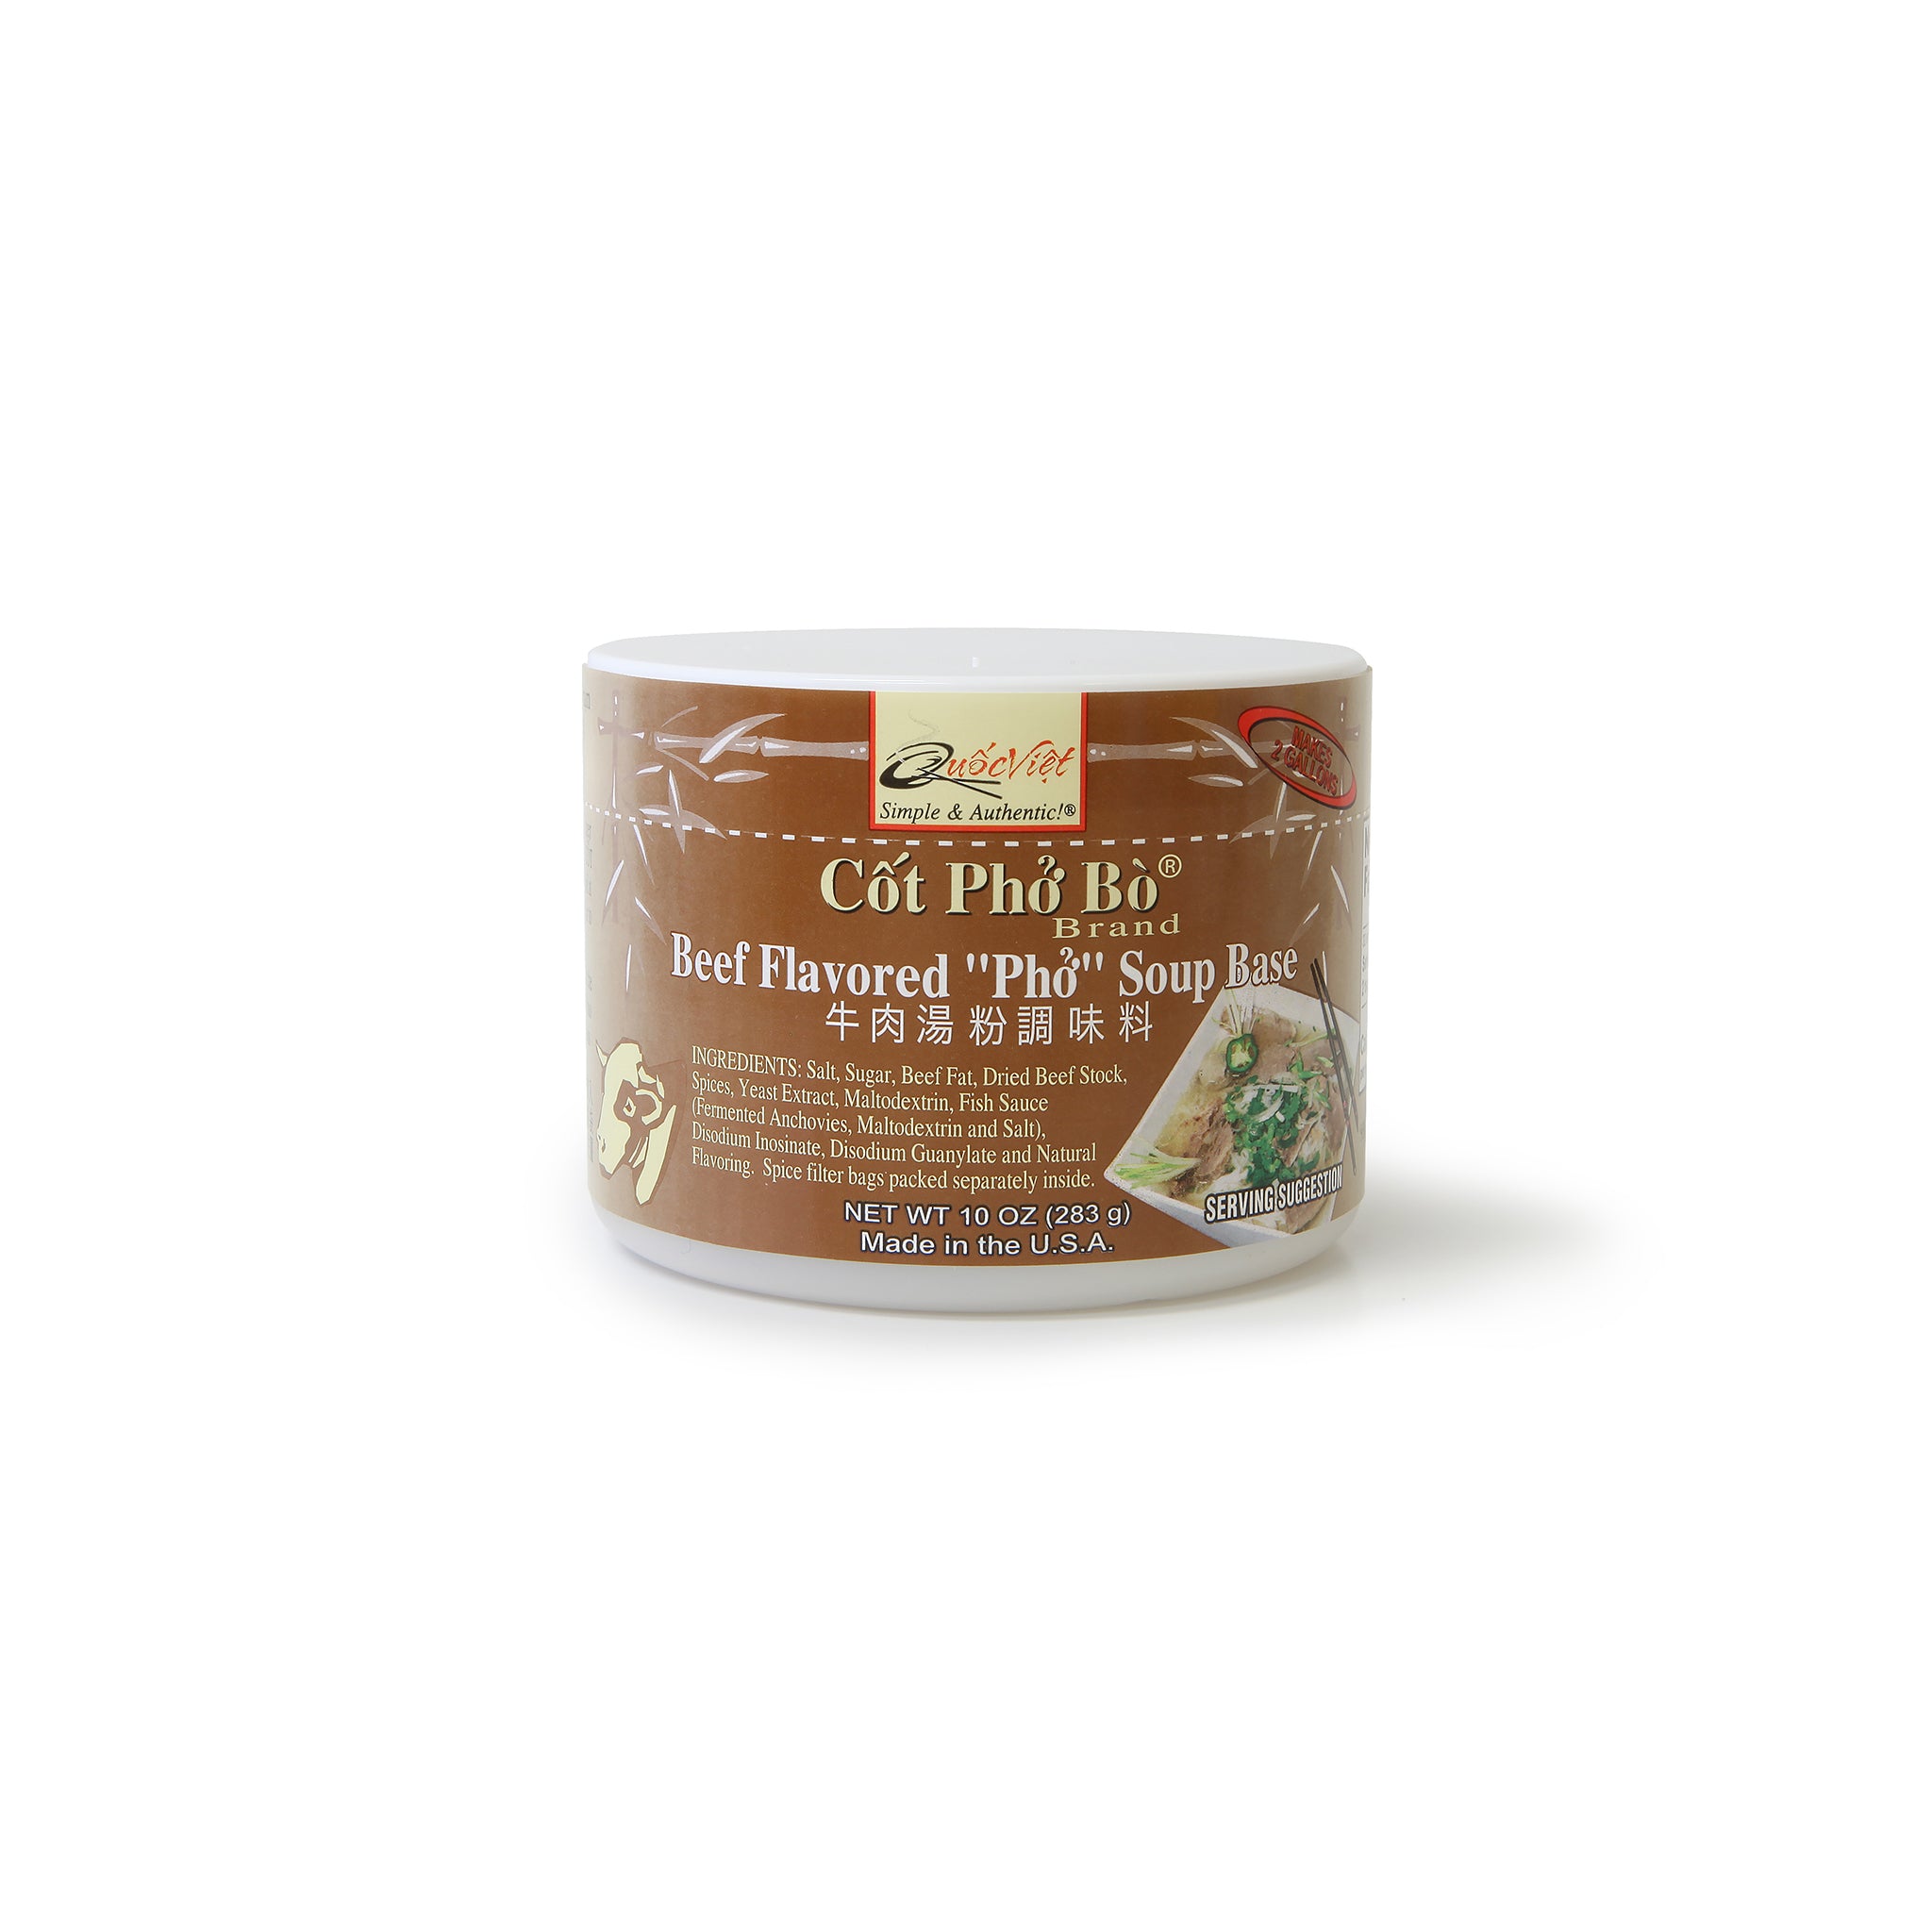 Cốt Phở Bò® Brand (Beef Flavored 